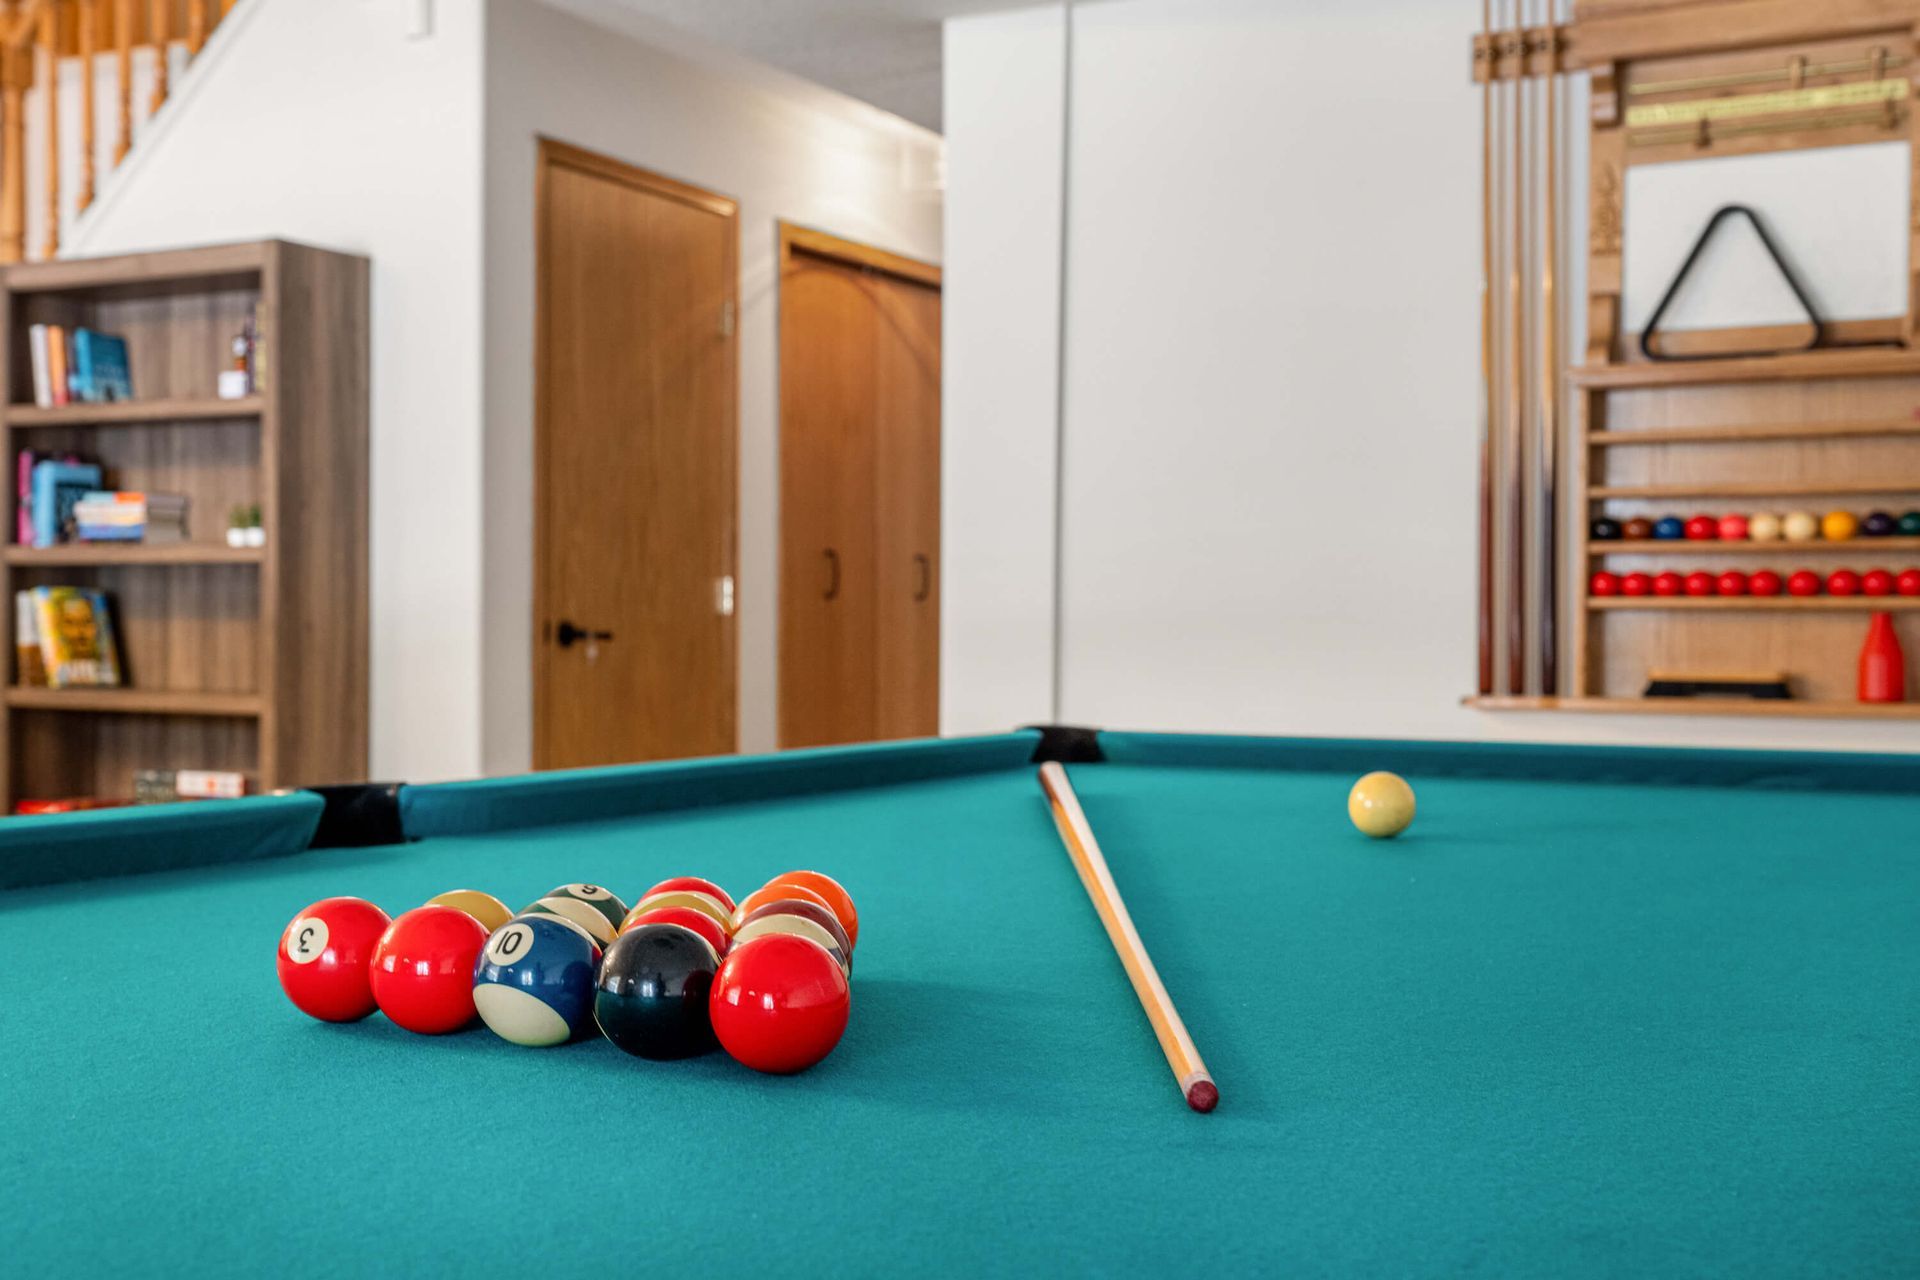 Pool table of Wide Open Spaces, a Radium BC Vacation Rental hosted by Aisling Baile Property Management.